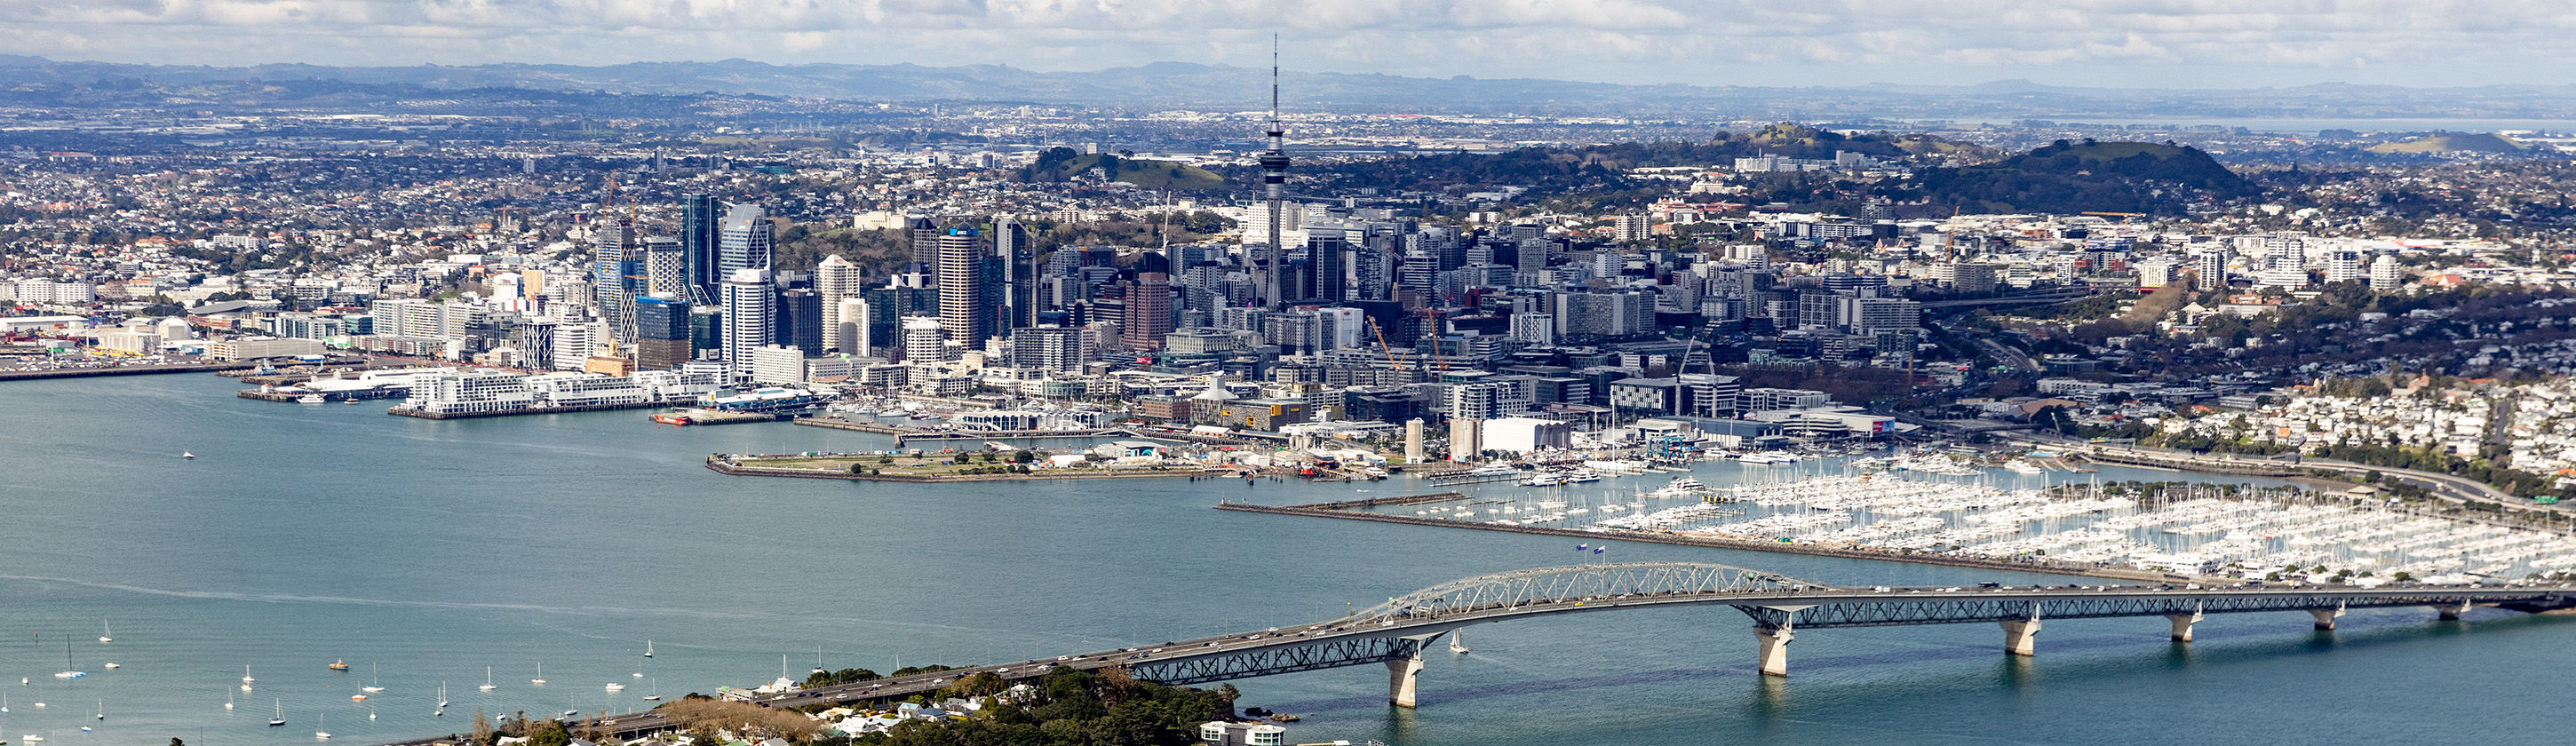 Aerial view of Auckland city looking south from Birkenhead, across the Waitematā. The iconic Sky Tower, high-rise buildings and sprawling urban areas sitting mostly on reclaimed land are in the middle of the picture. The Auckland Harbour Bridge connecting the city and the North Shore is in the foreground. Numerous boats are docked in the Westhaven Marina at the southern end of the bridge. Some volcanic cones, including the distinct dark green Maungawhau / Mount Eden are in the background.